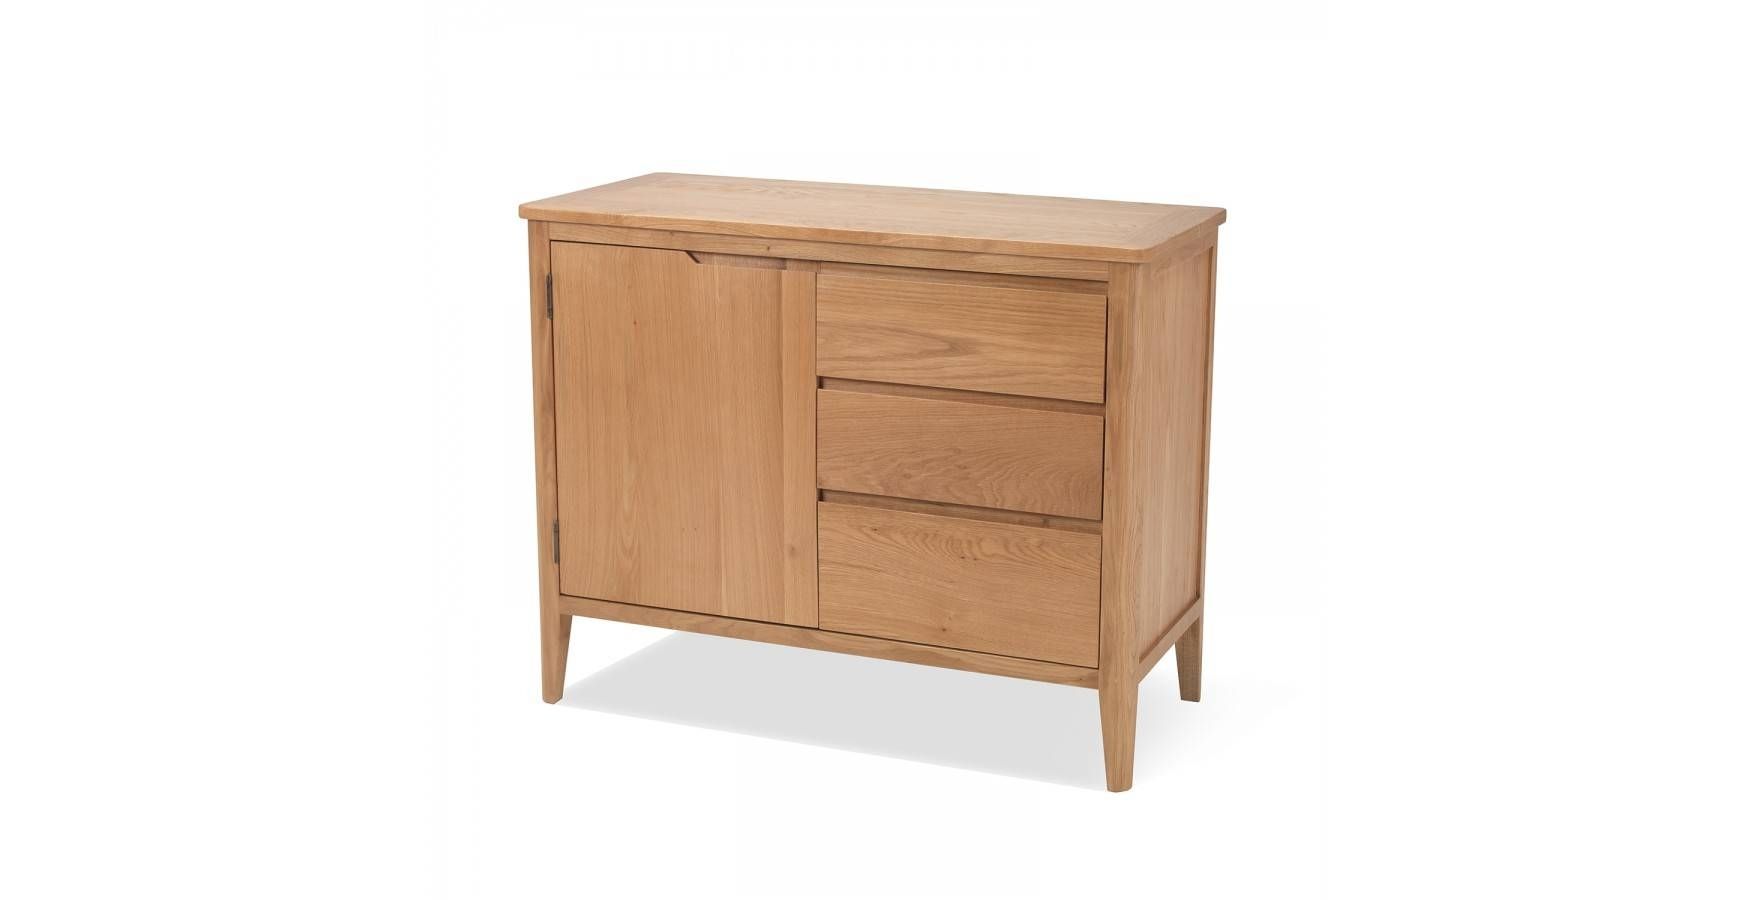 Cadley Oak Small Sideboard With Drawers – Lifestyle Furniture Uk With Regard To Sideboards With Drawers (View 3 of 15)